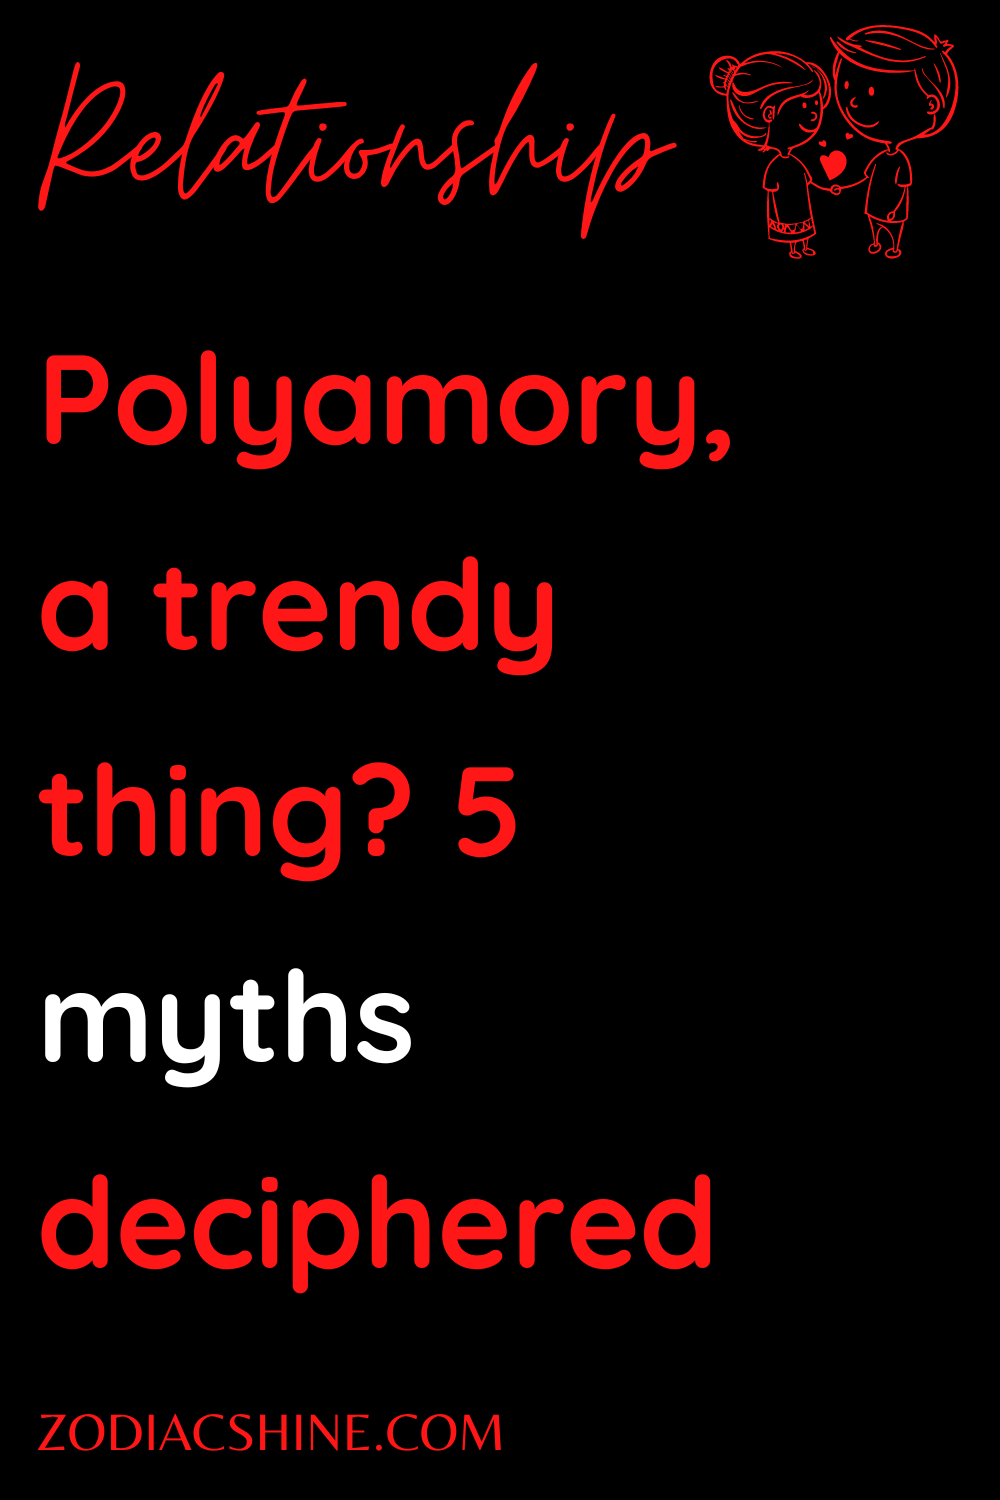 Polyamory, a trendy thing? 5 myths deciphered